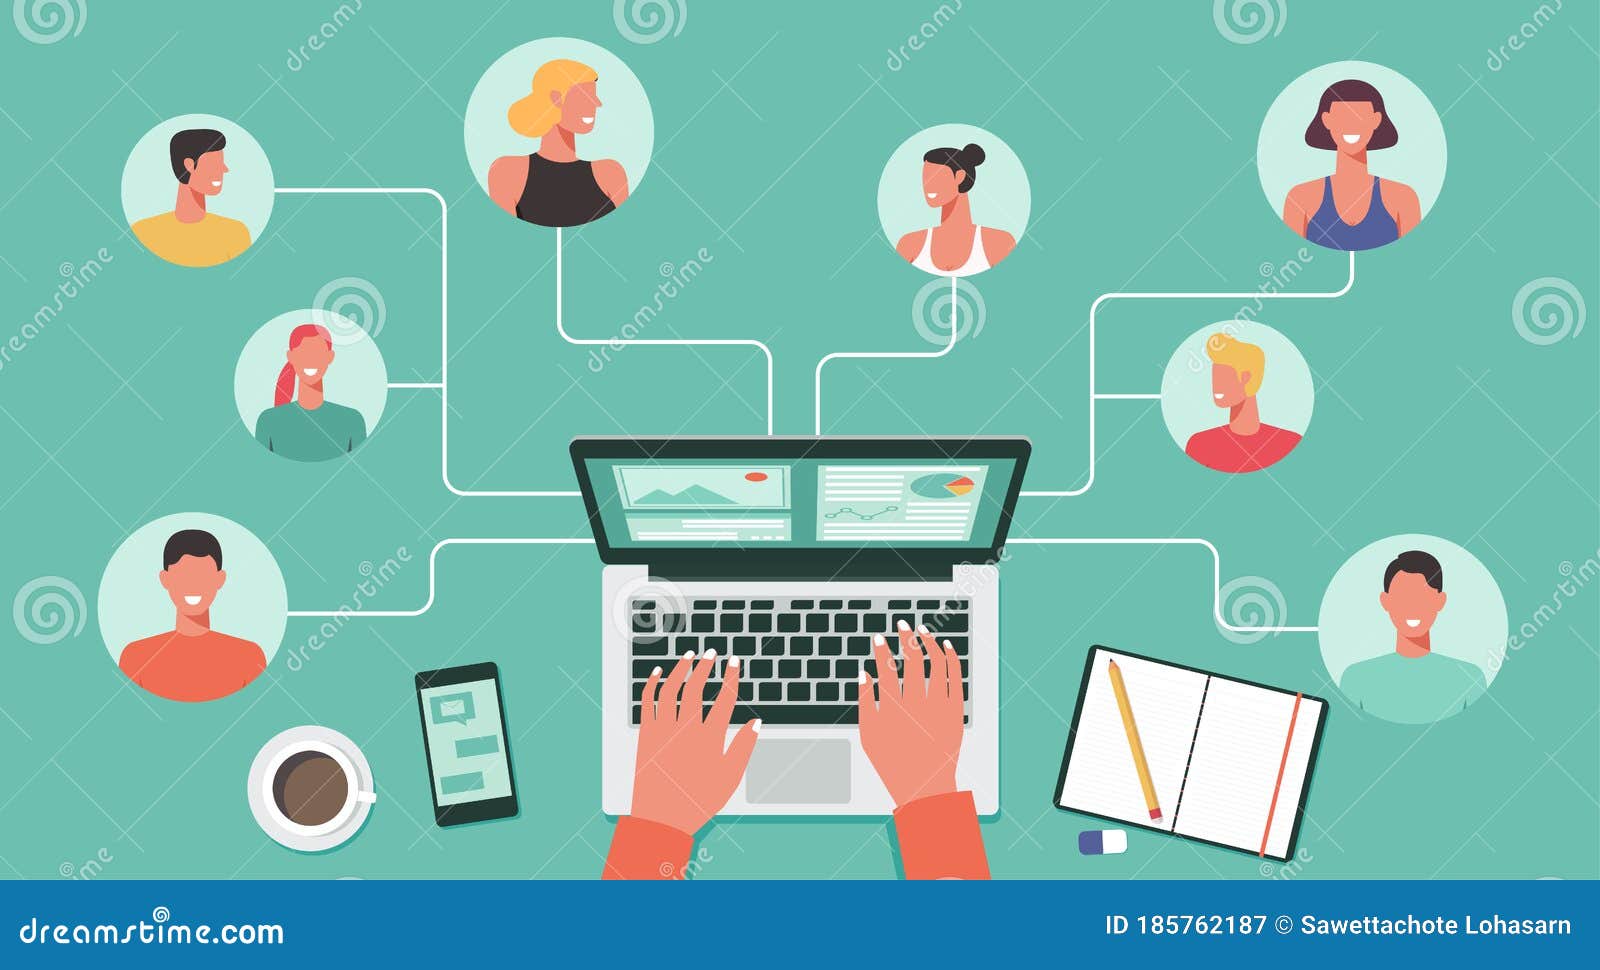 people with different and expert skills connecting working online together on laptop